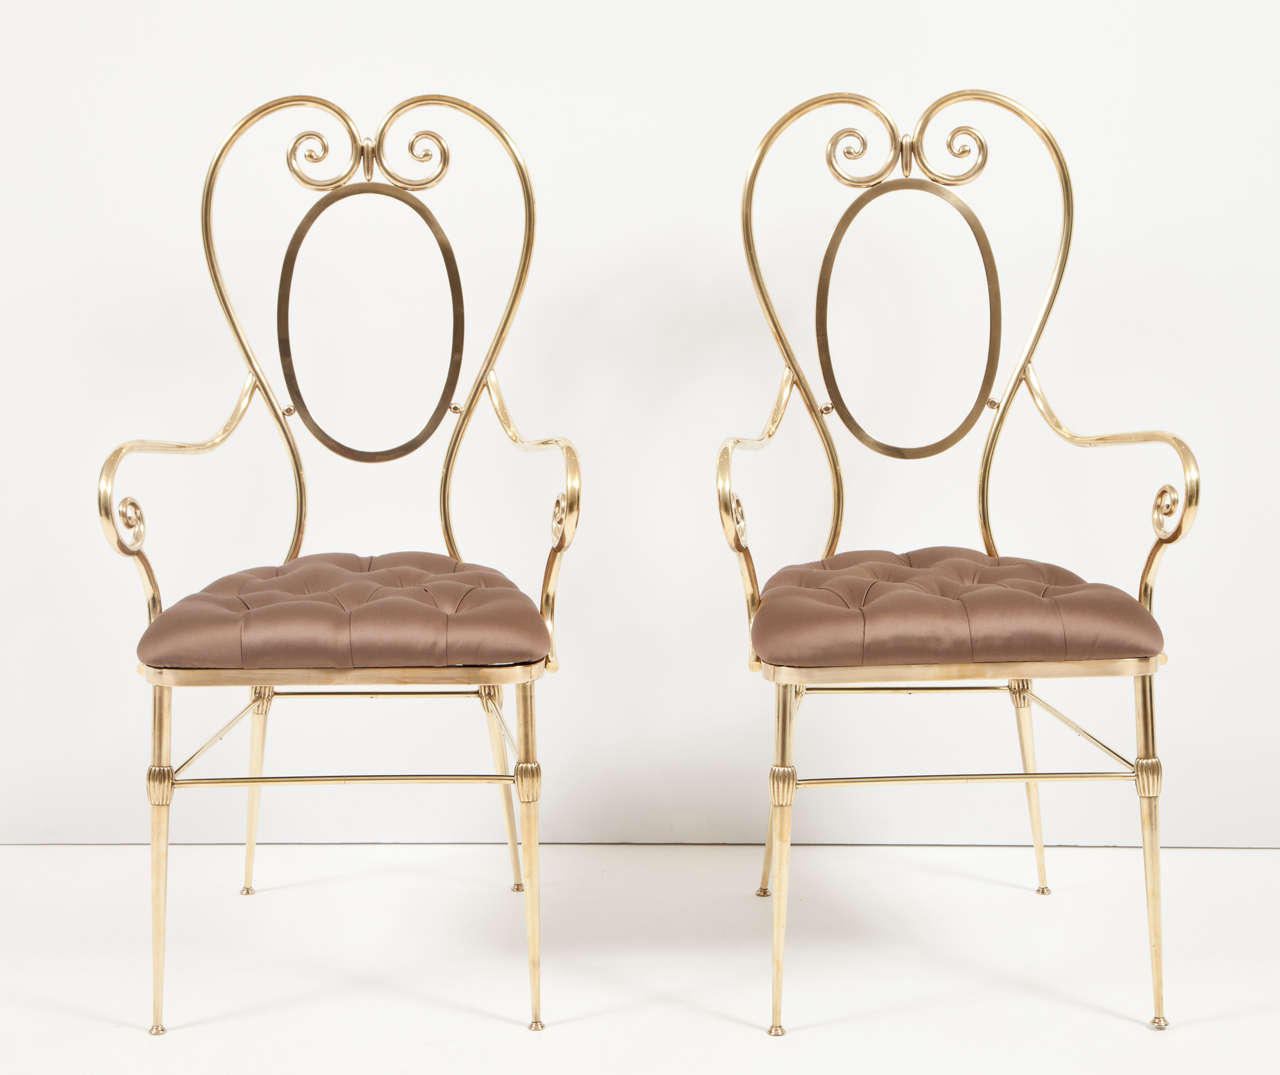 Decorative pair of midcentury, brass side chairs, Italy, circa 1950. Upholstery in silk fabric, diamond tufting. Measures: seat Height is 18 inches.